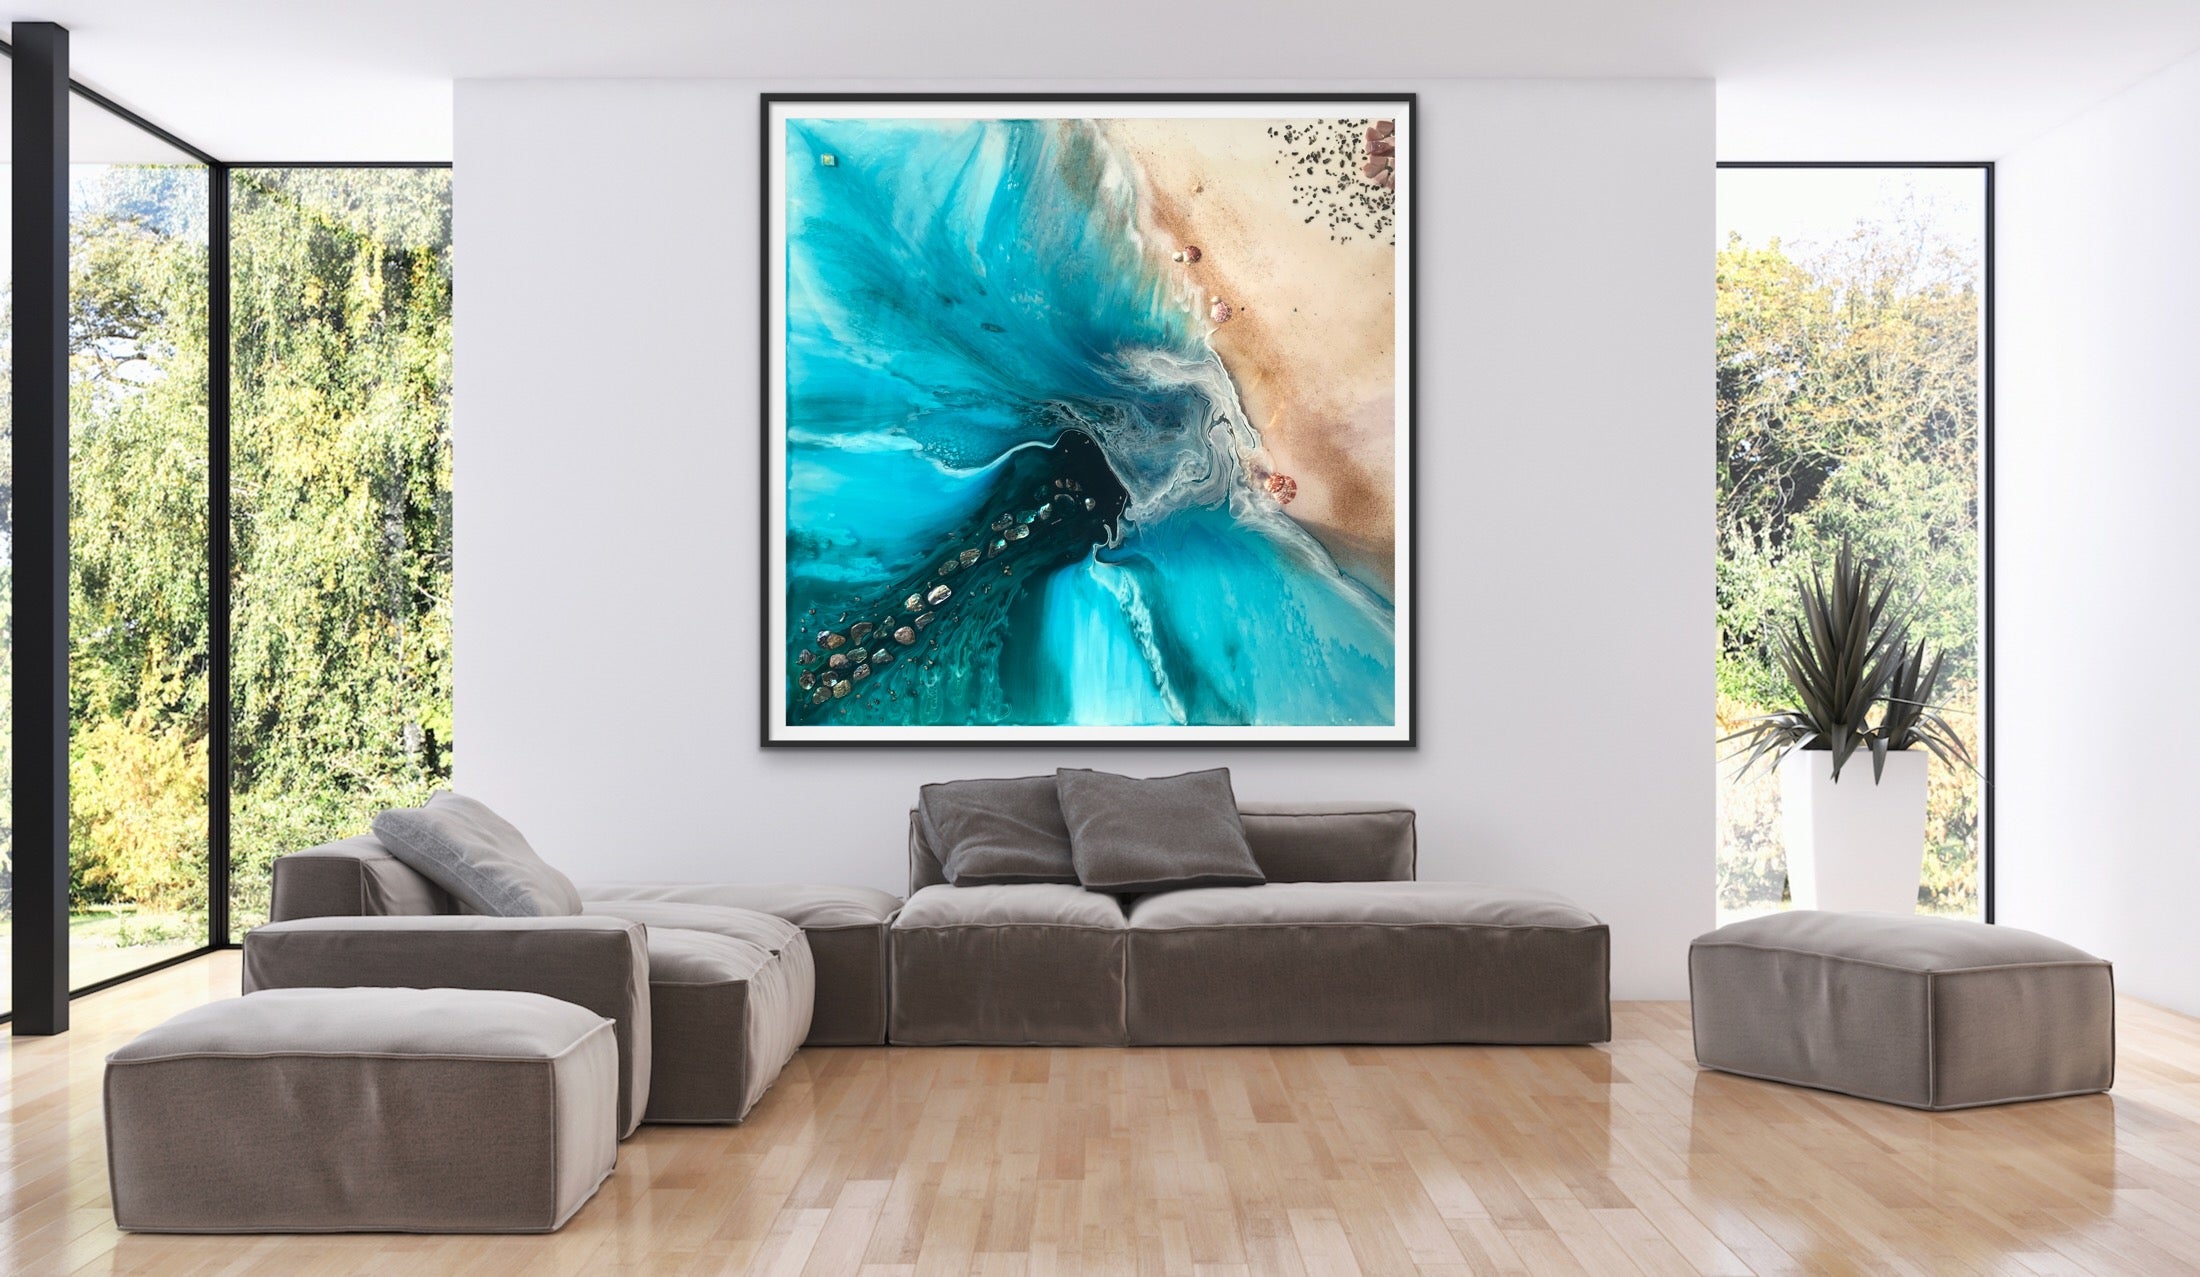 Abstract Seascape. Aqua. Rise Above 2 Square. Art Print. Antuanelle 5 Ocean Limited Edition Print